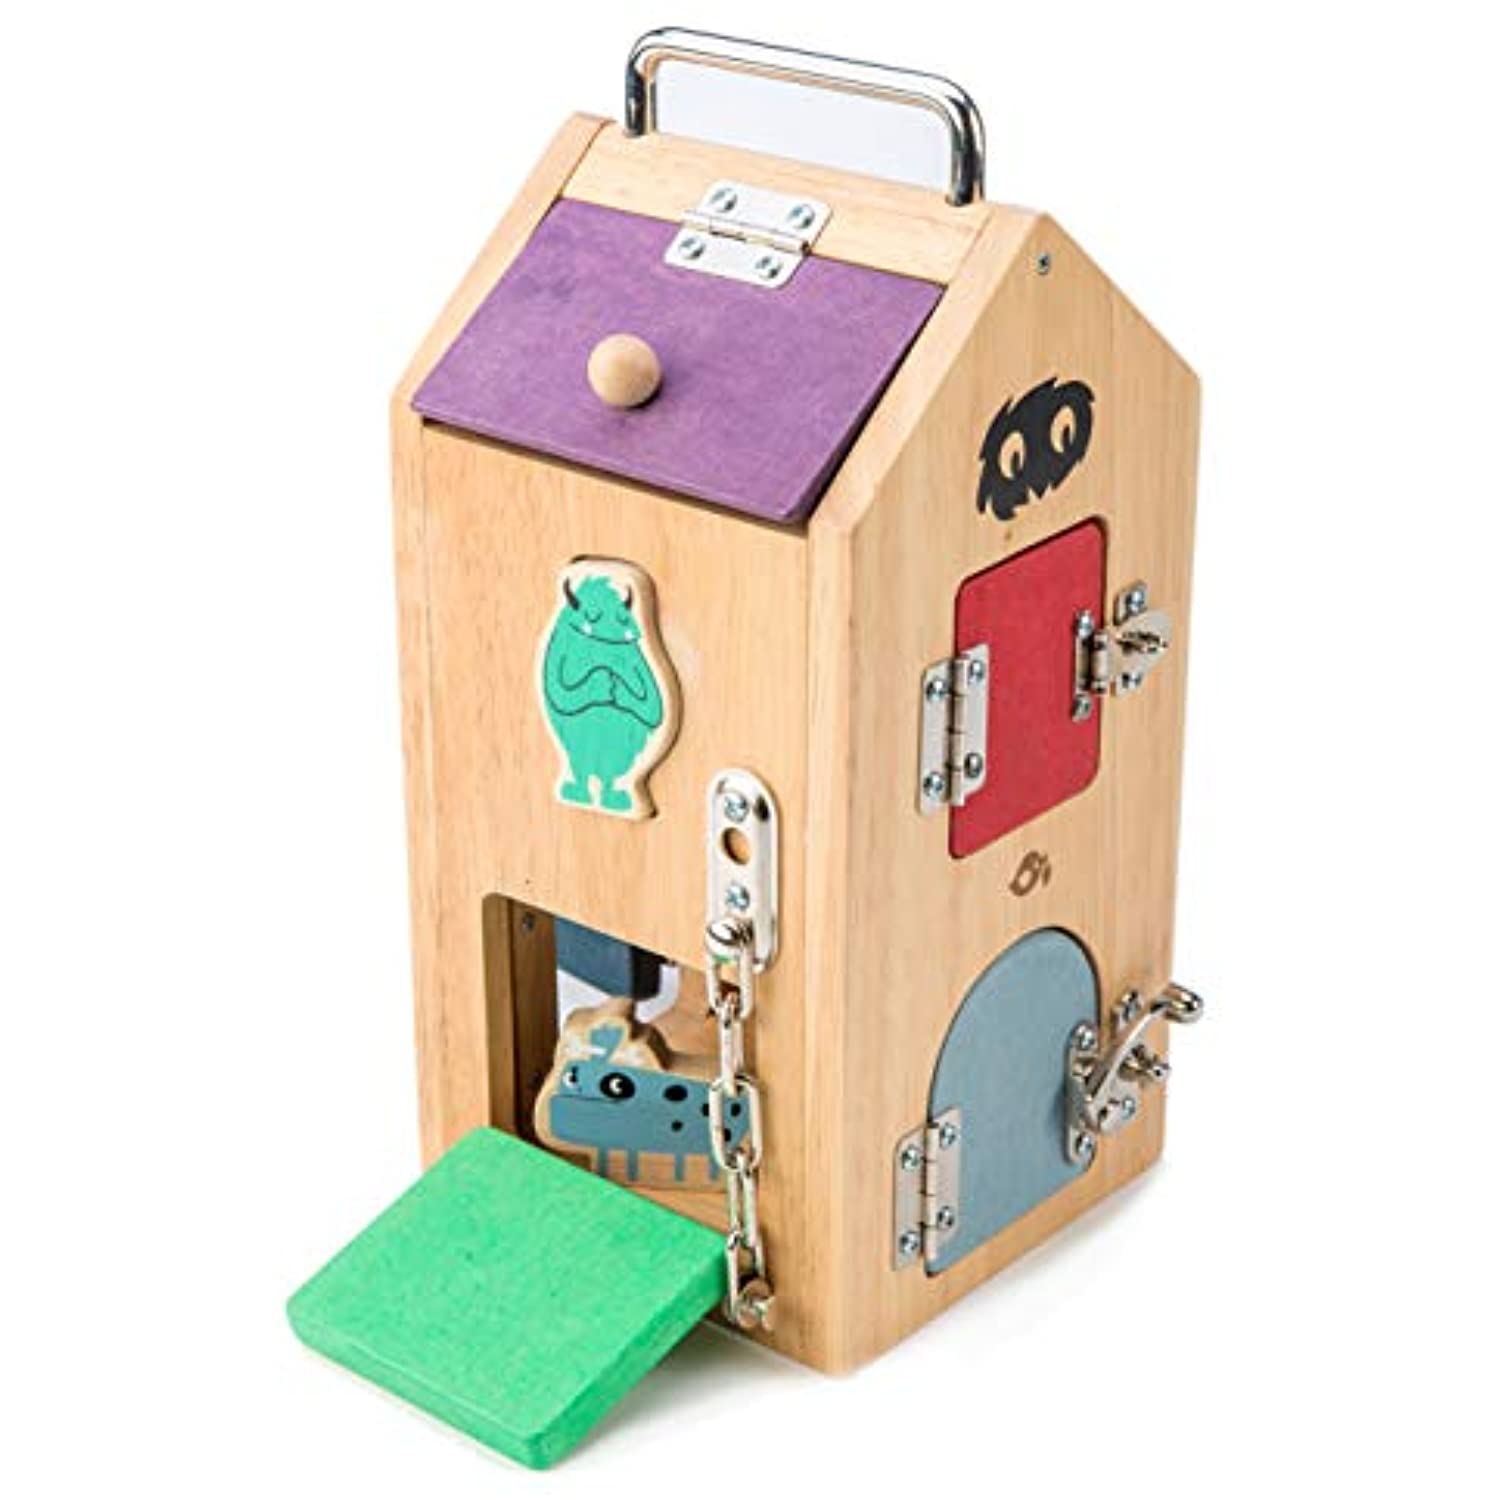 Tender Leaf Toys Wooden Monster Lock Box - 8 Different Doors with Various Lock Mechanisms Helps Develop Probelm Solving Skills - 3 +, Multicolor, 6.5" x 6.7" x 11.7" - image 1 of 6